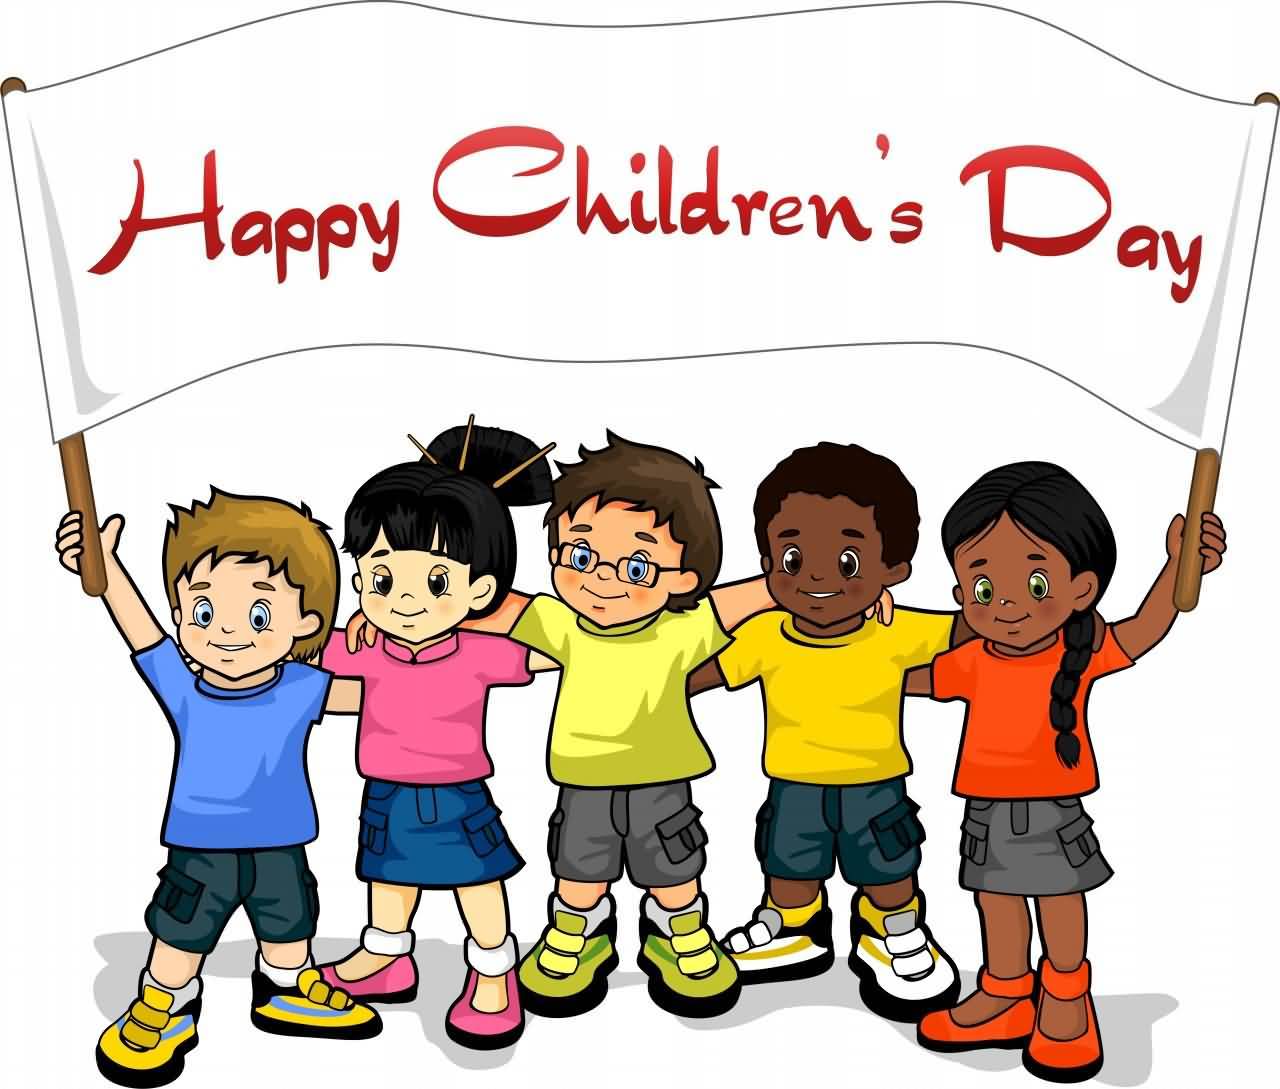 Kids With Happy Children's Day Banner Image